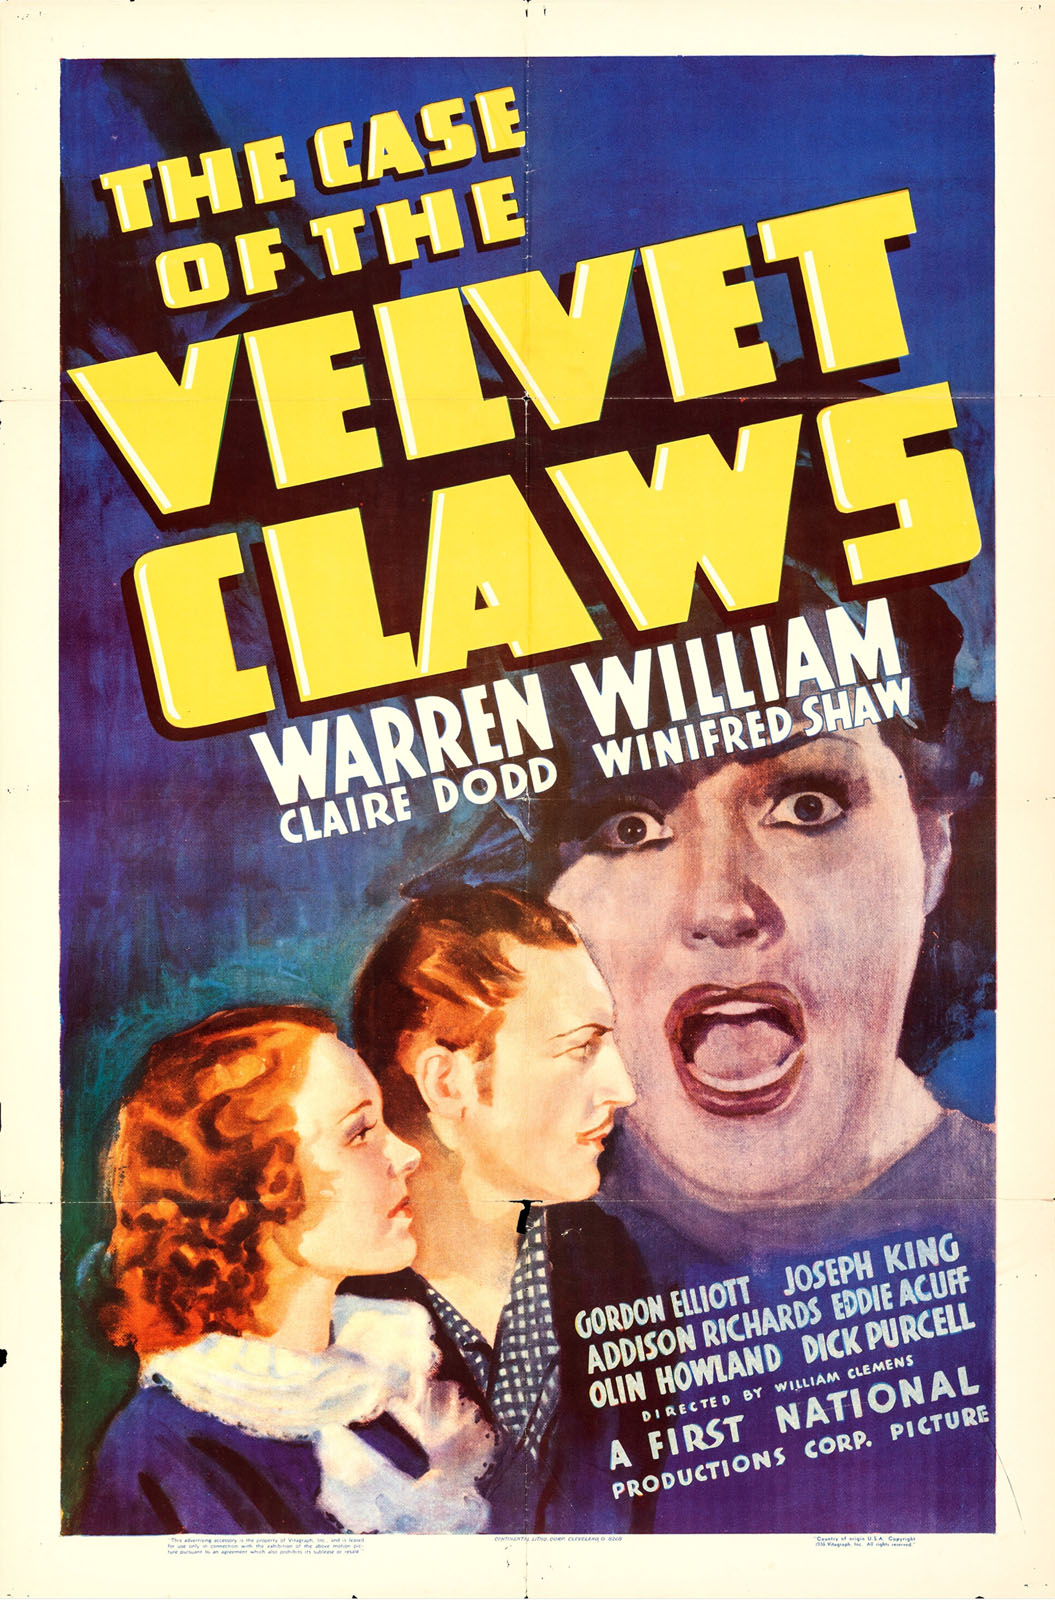 CASE OF THE VELVET CLAWS, THE